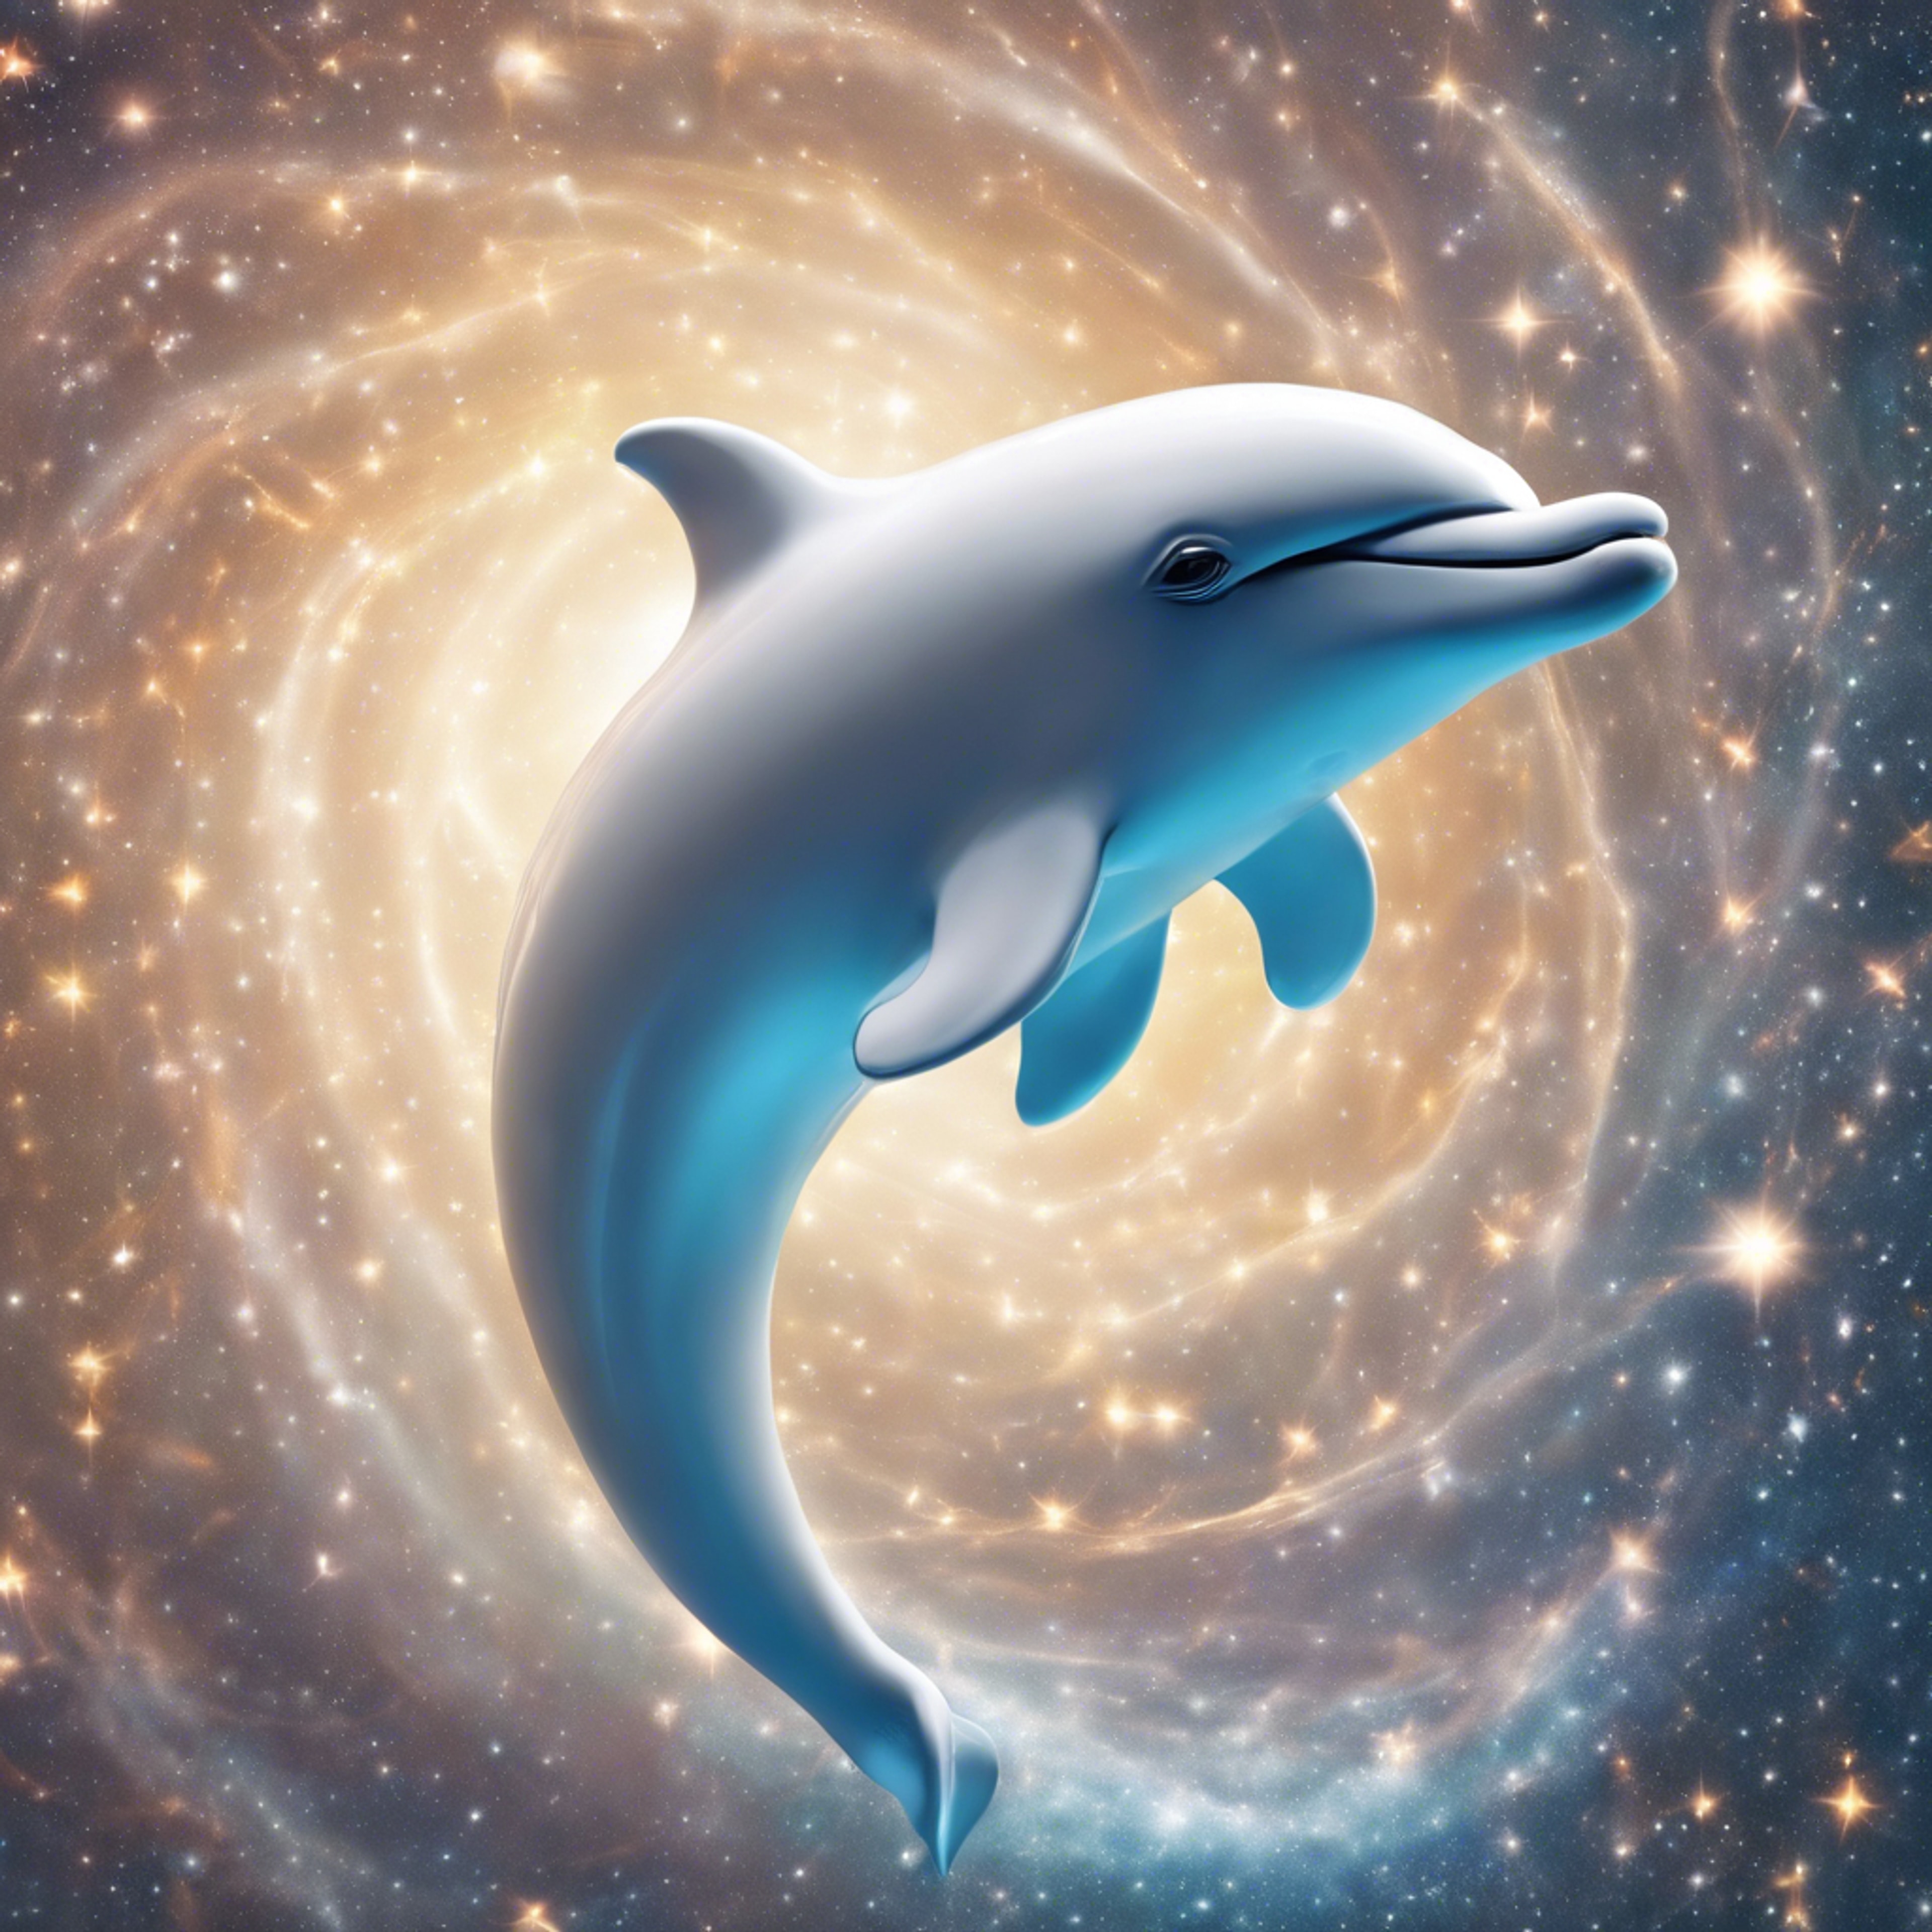 An artist's dreamy portrayal of a porcelain-white dolphin emerging from a swirl of stars in the endless cosmos. Fond d'écran[07abc05d40734834903a]